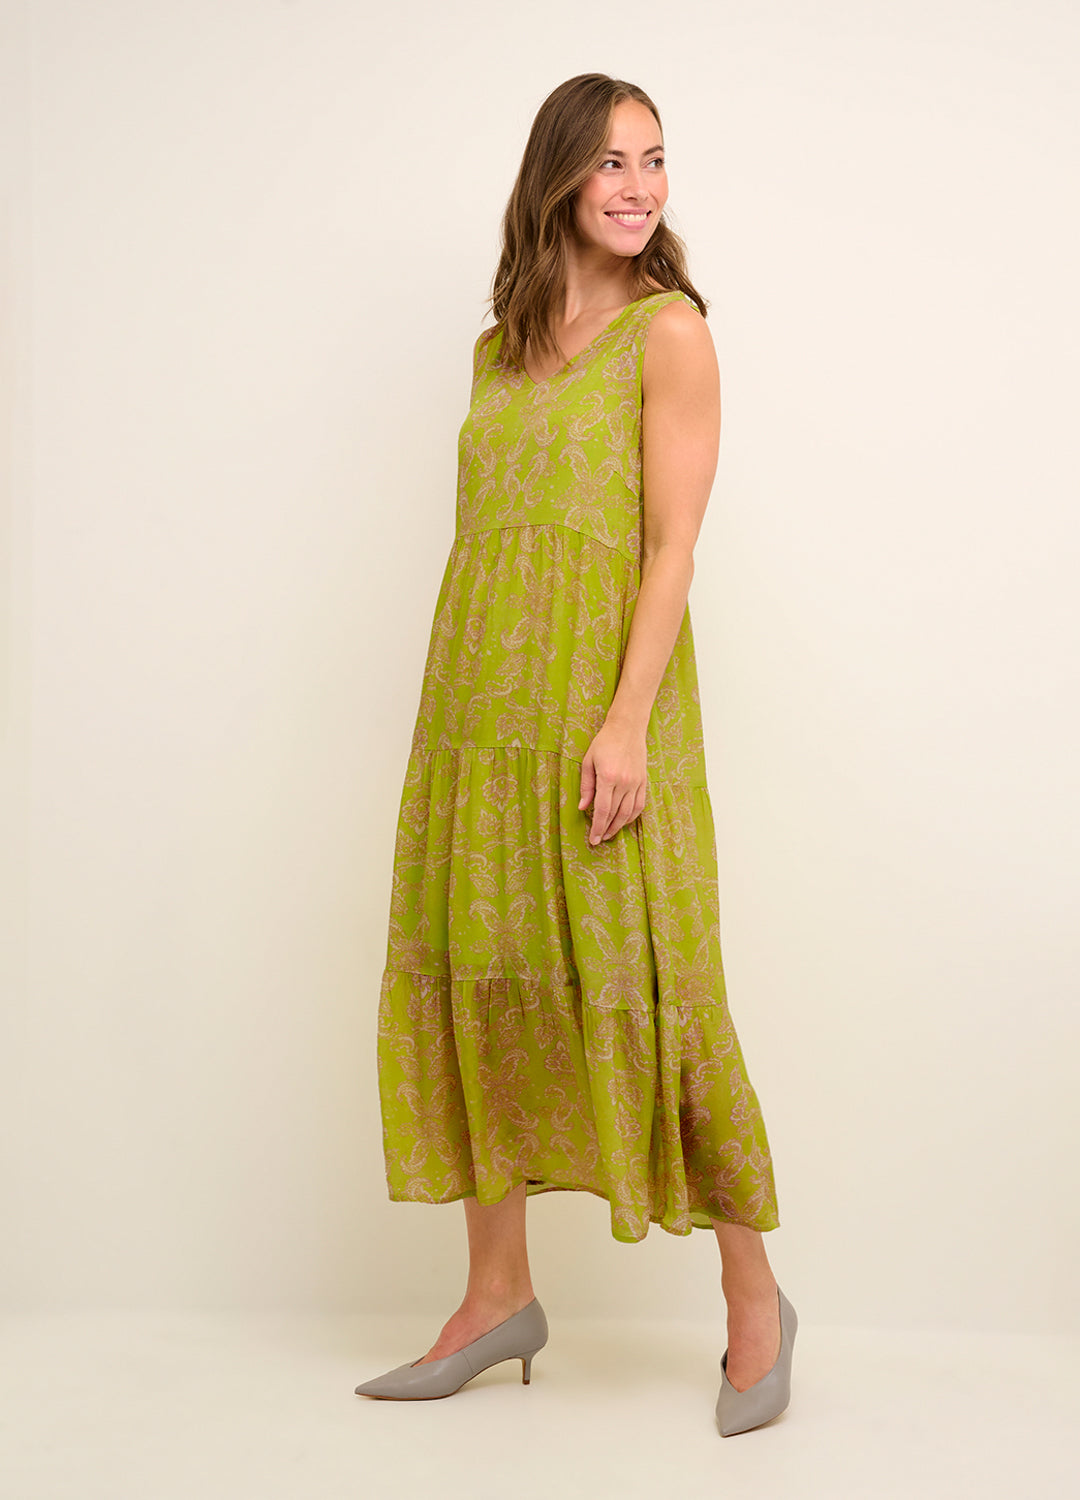 Cream Clothing Param Long Dress in Wild Lime tapestry print at Inner Beach Co, Toronto, Ontario, Canada